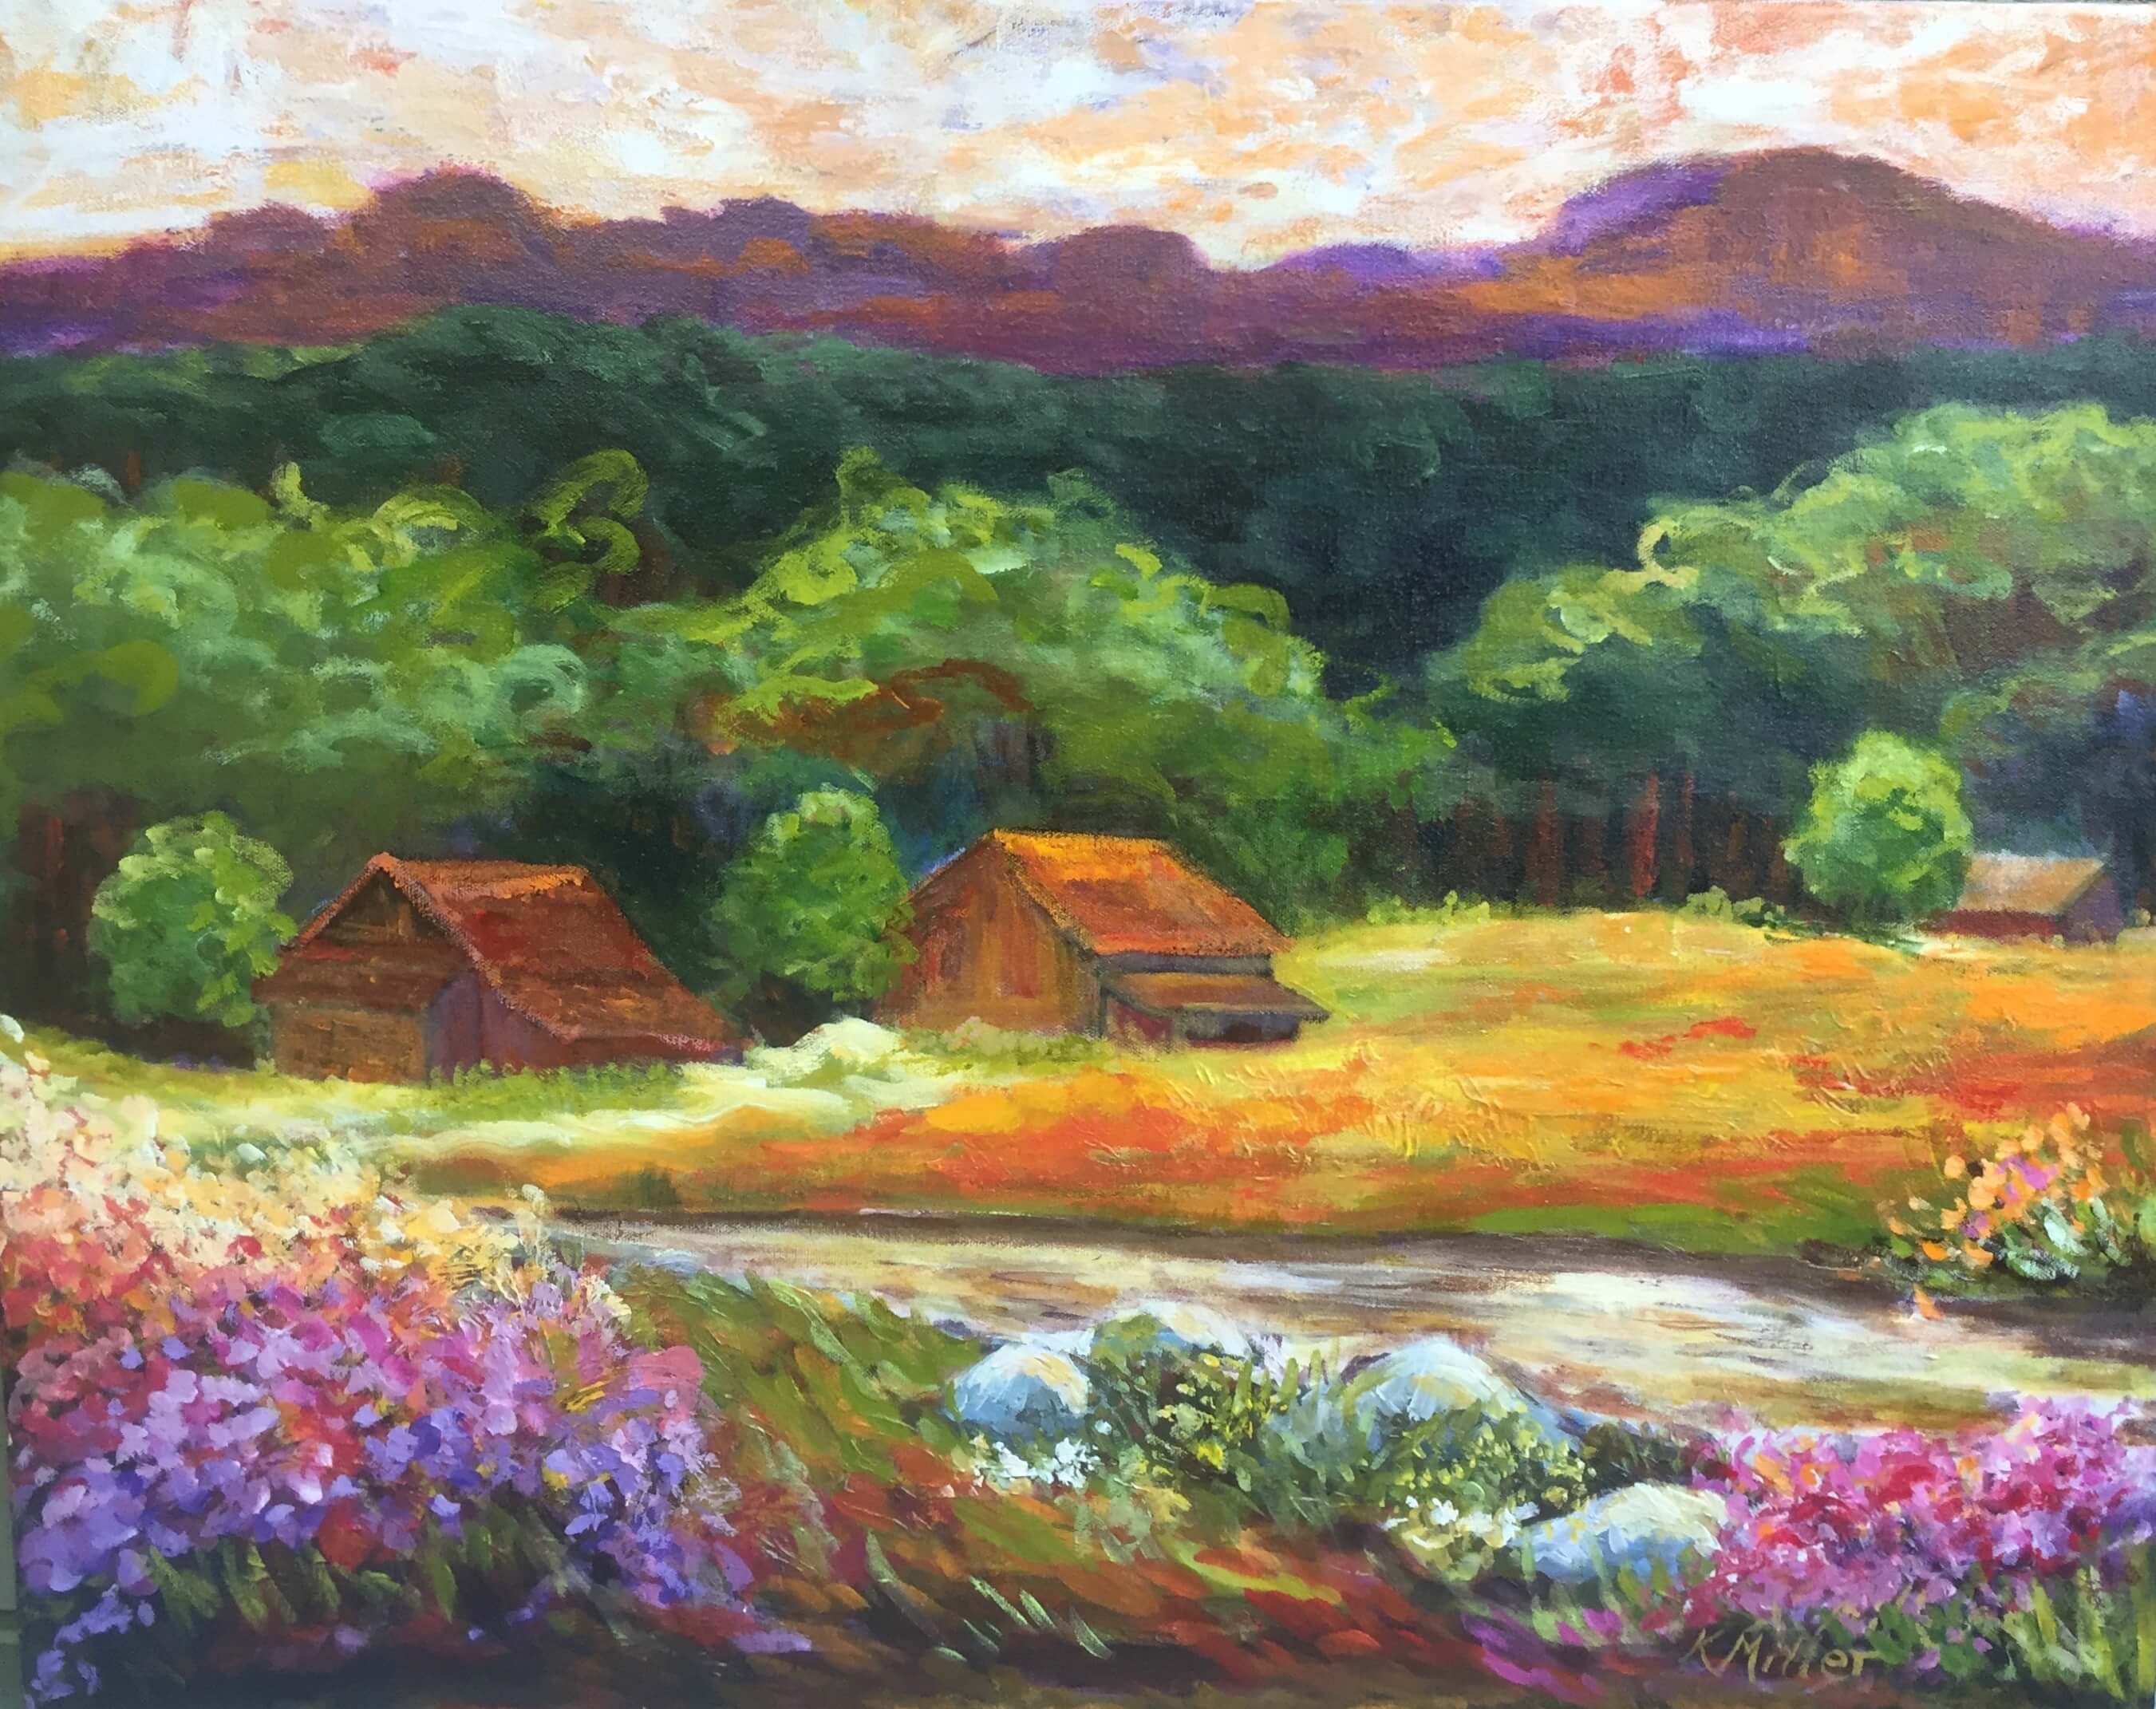 A Mountain Brook and Meadow 22" x 28" Acrylic on Canvas Original Painting by Kathy Miller